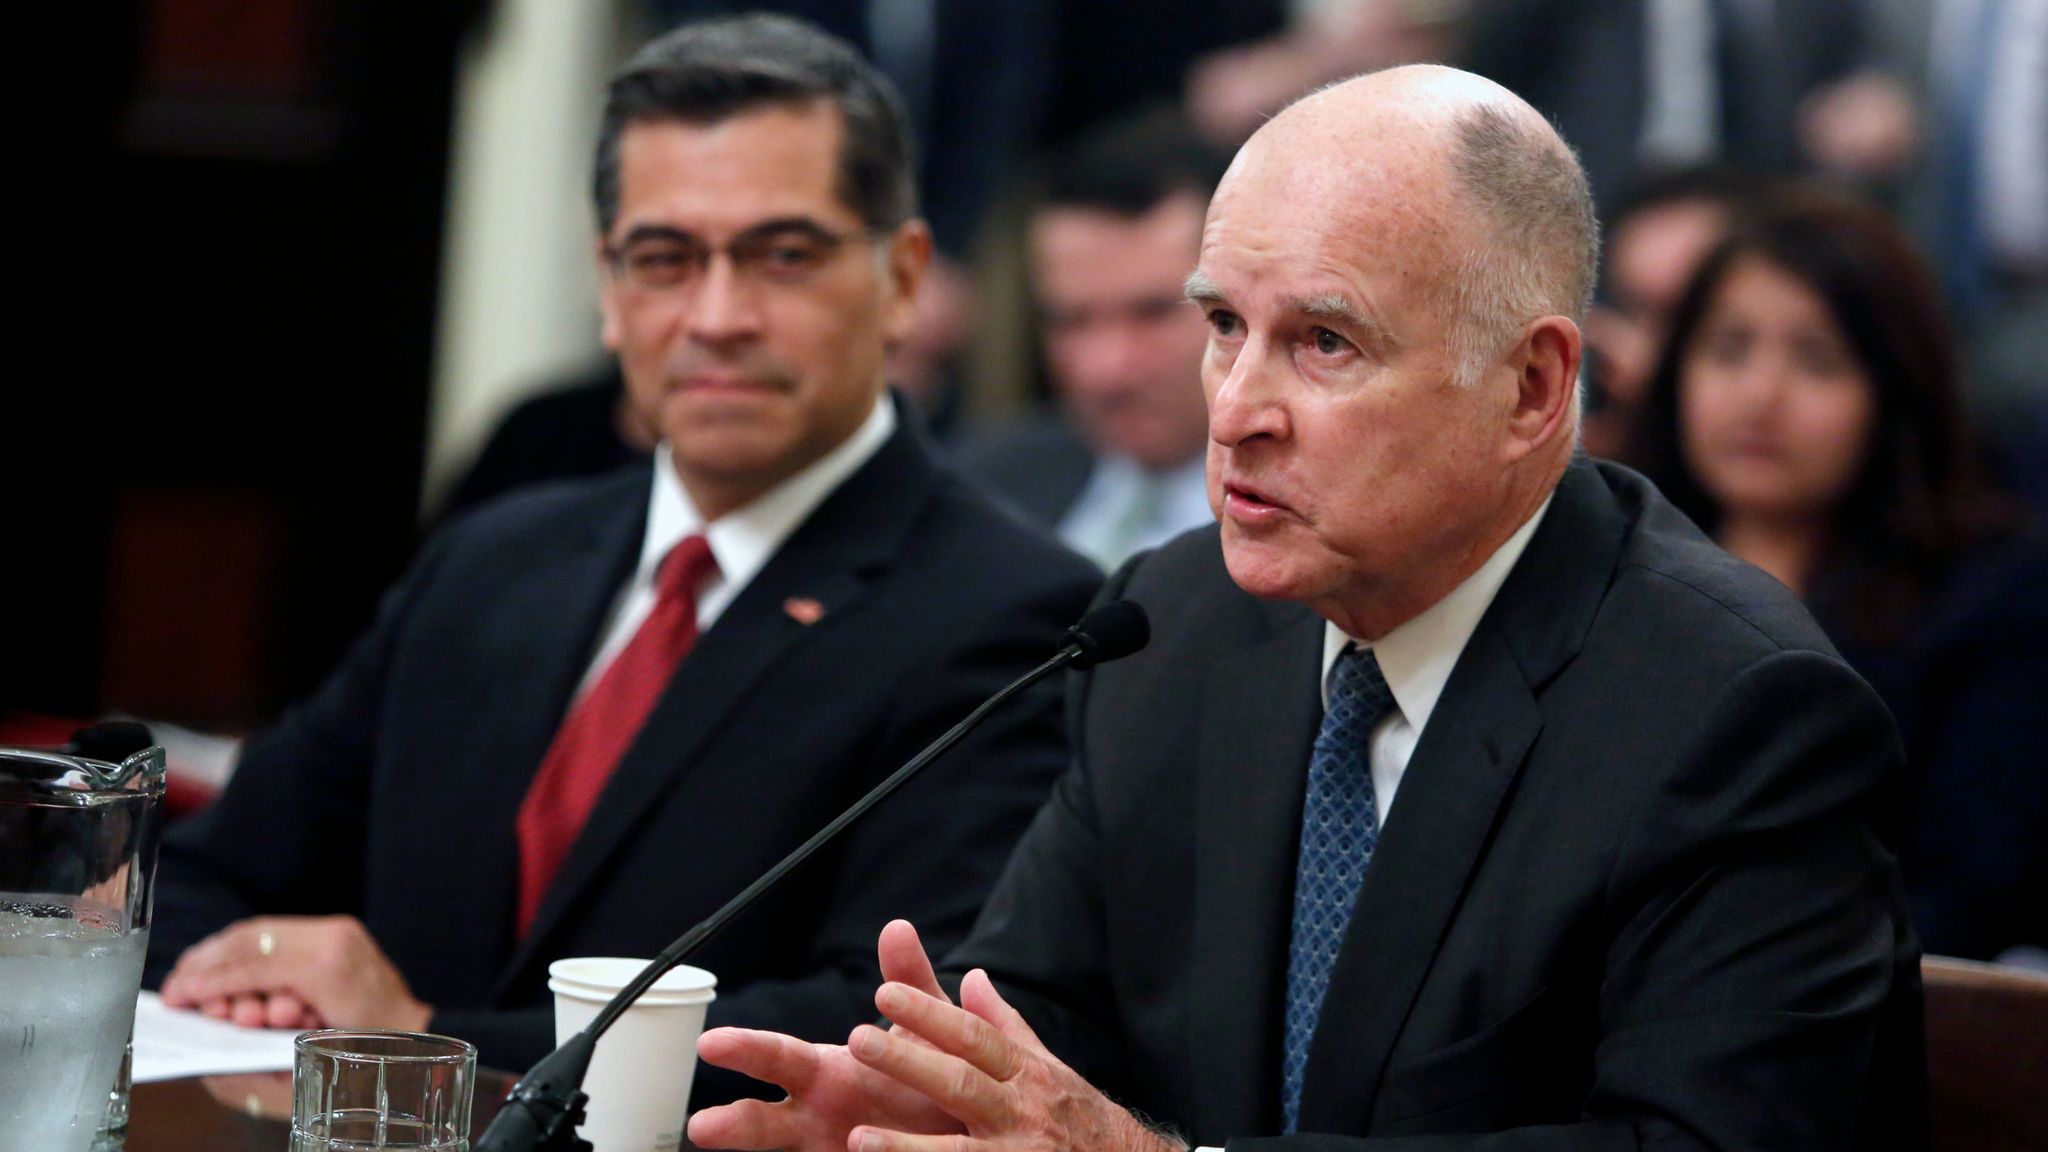 Gov. Jerry Brown introduces then-Rep. Xavier Becerra at an Assembly confirmation hearing in January.